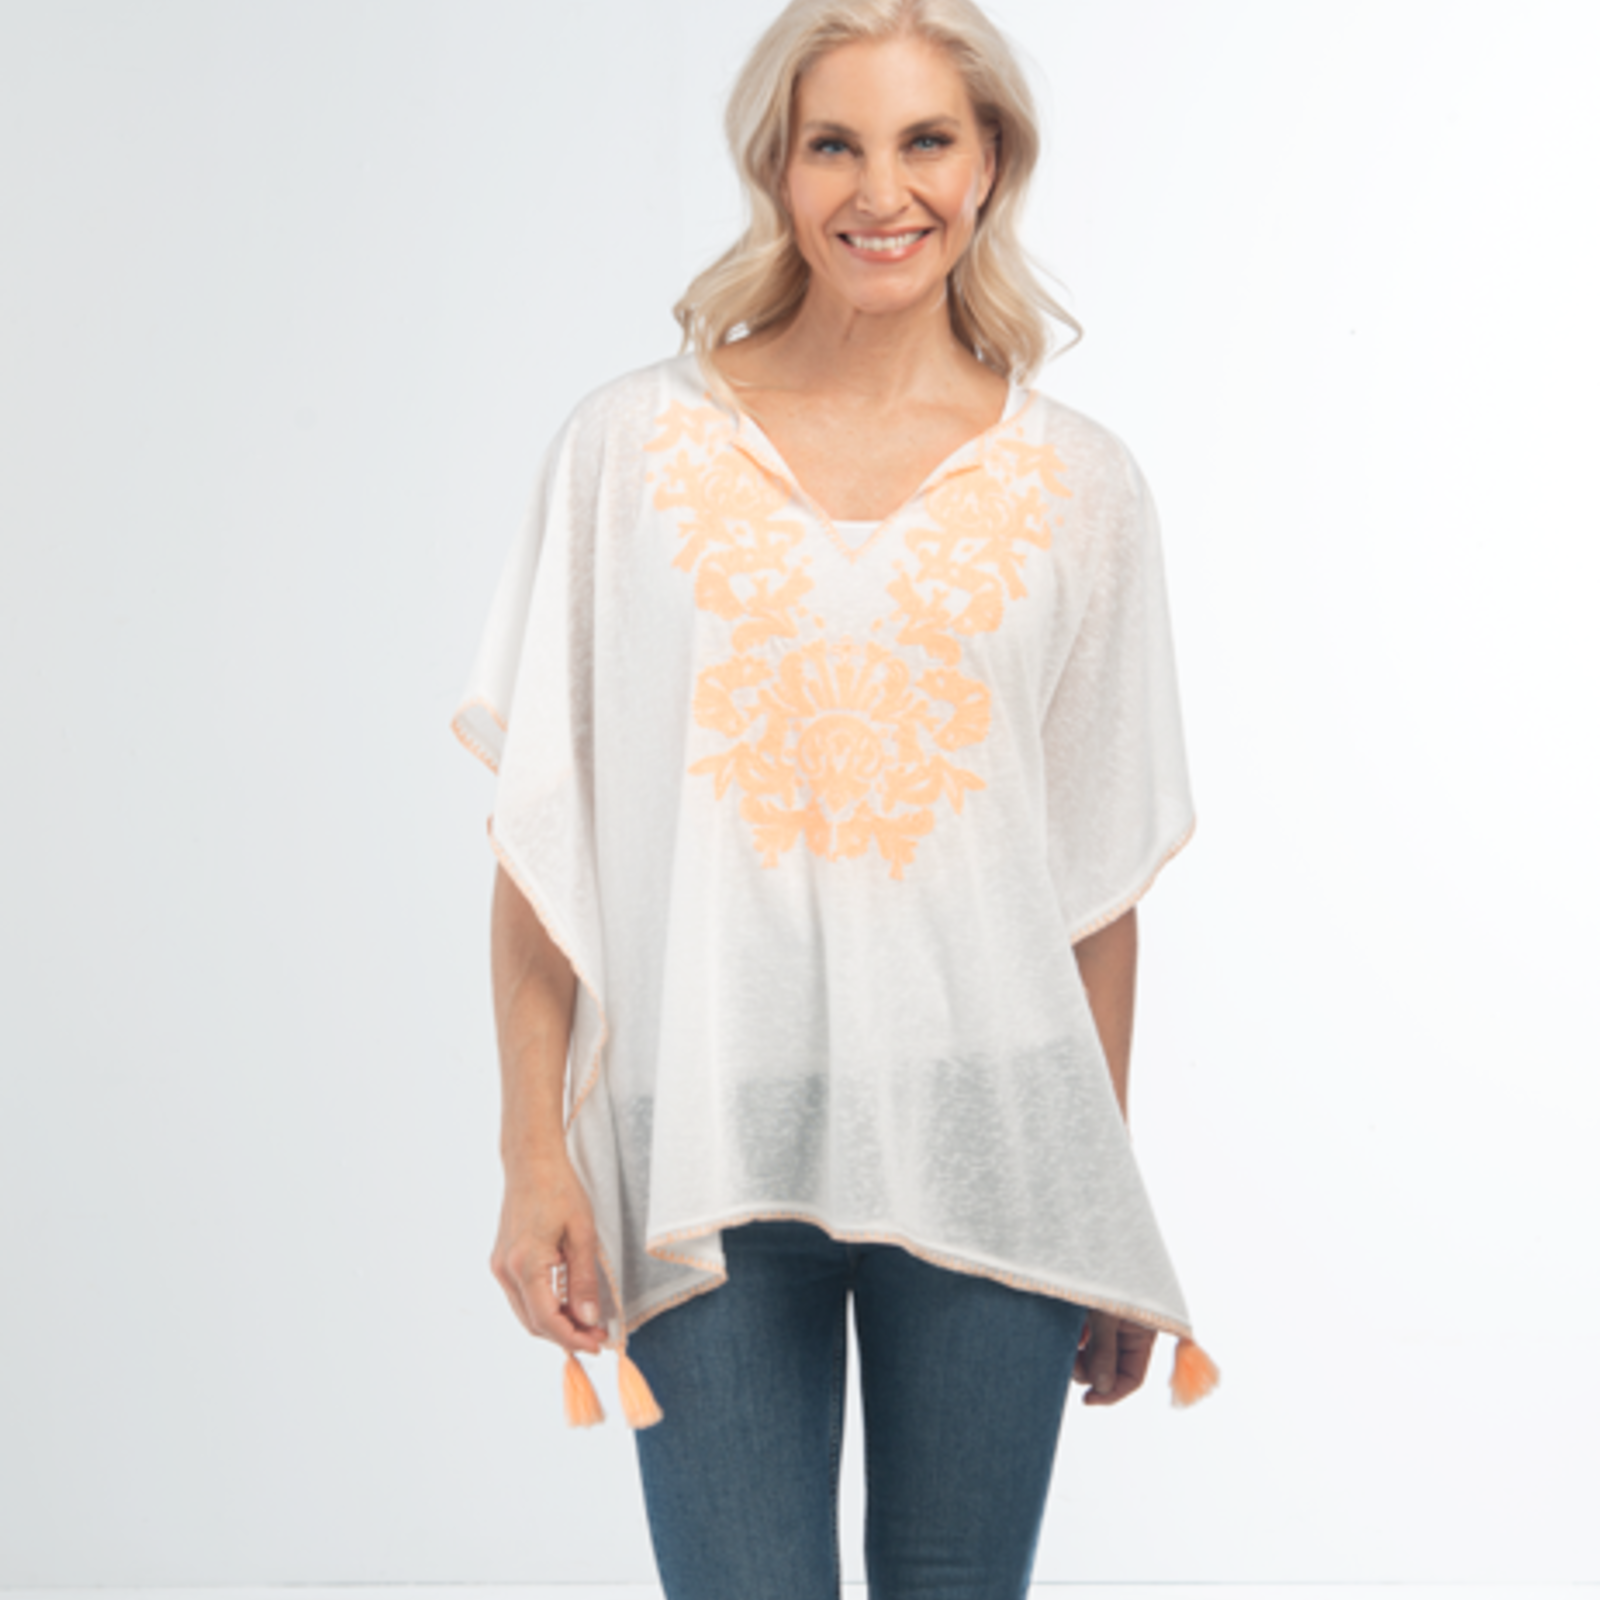 Simply Noelle Embroidery Poncho Top  STOP225 loading=